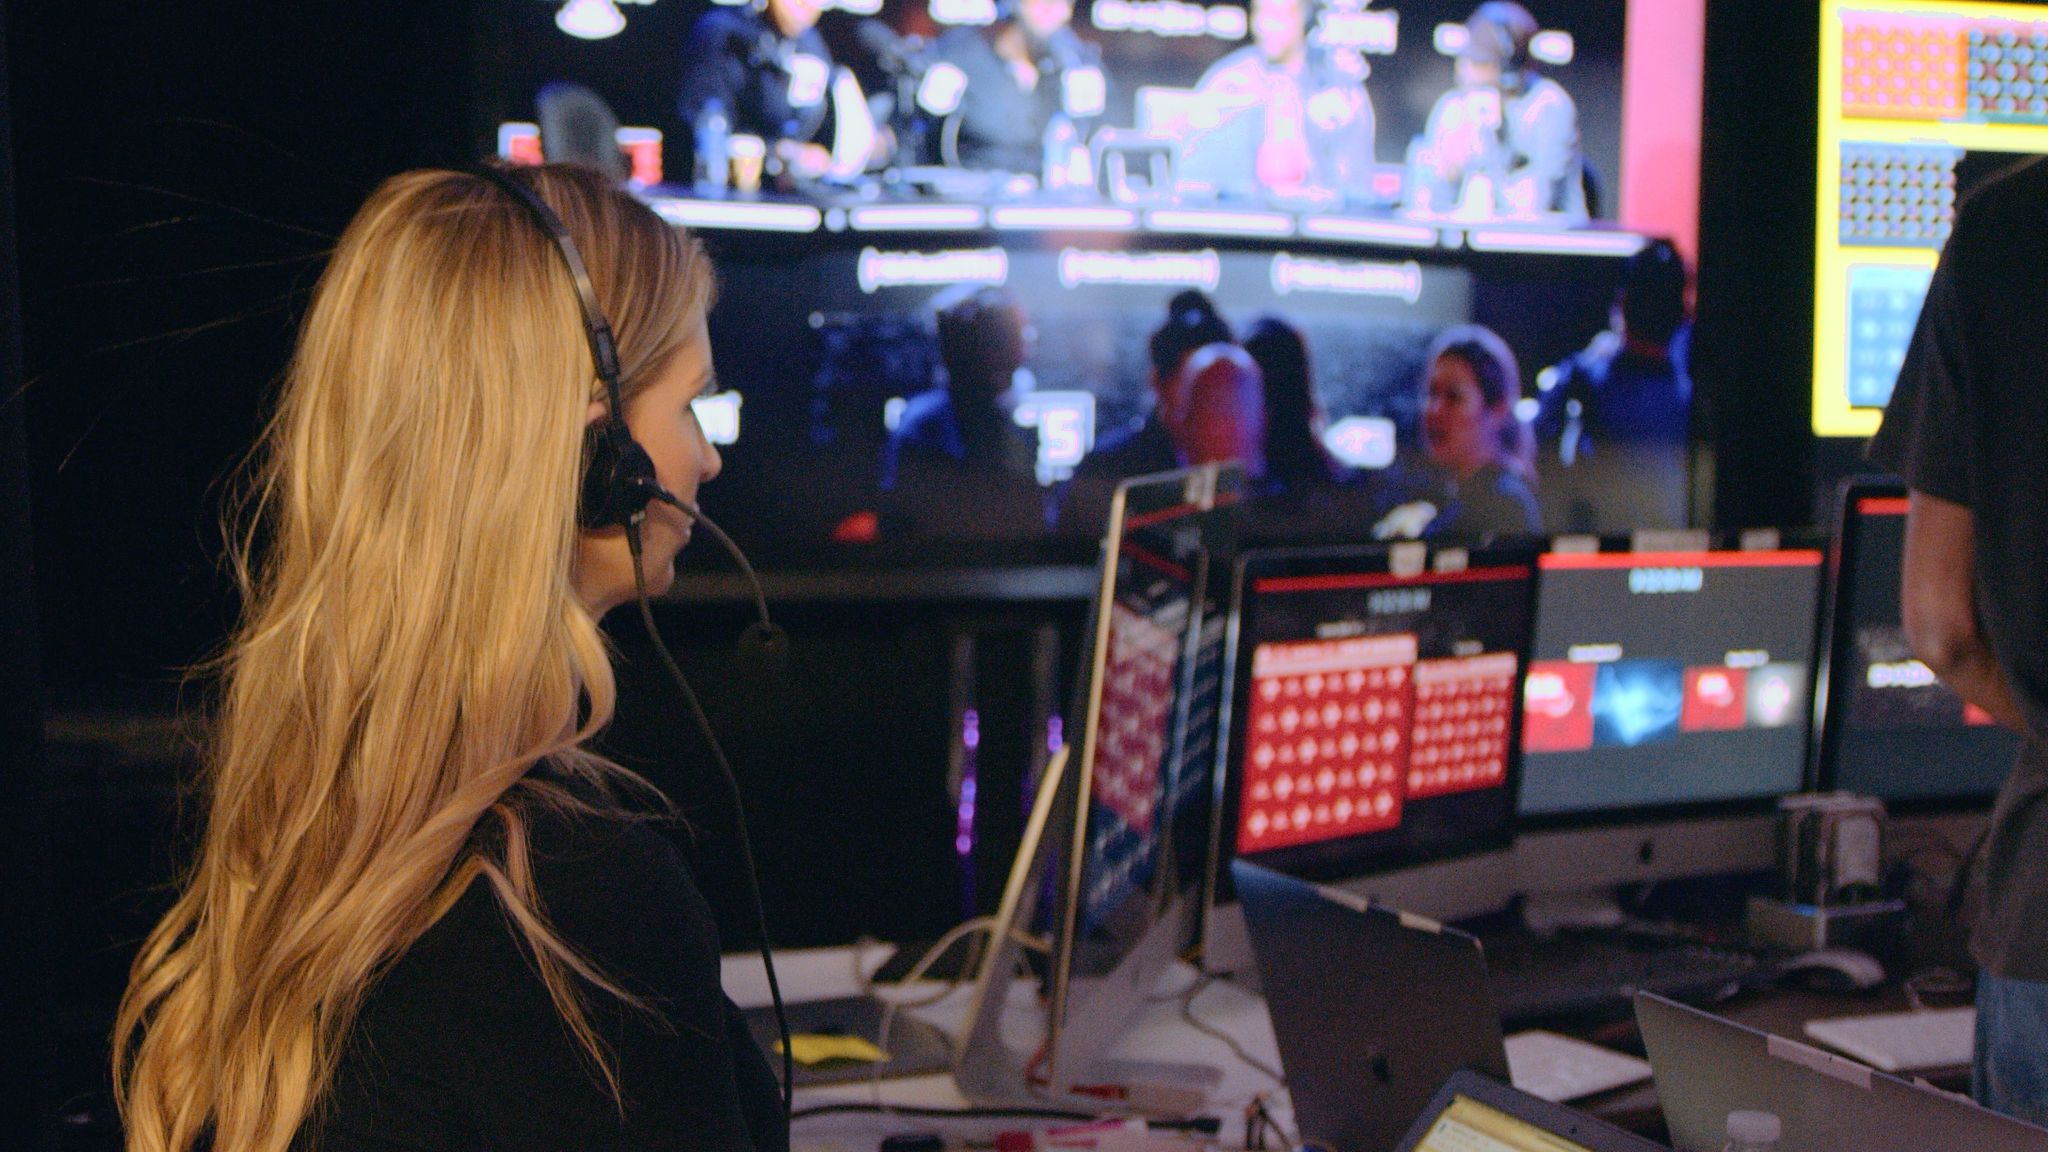 What to Consider in Event Production in a Post COVID world focus on video streaming Side profile of woman with long blond hair wearing a headset by video bank